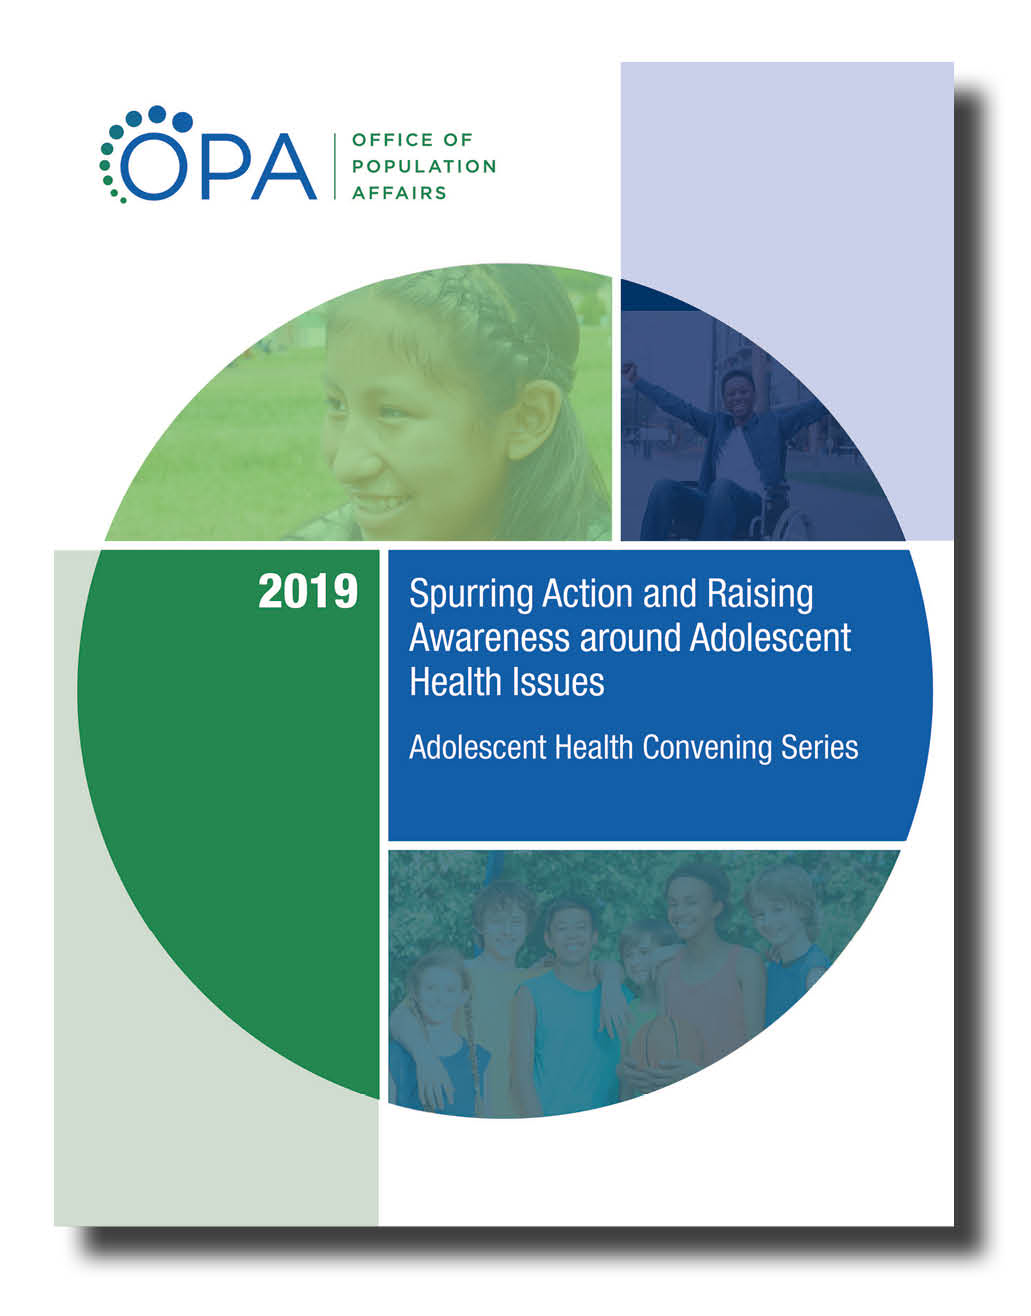 Report - Office of Population Affairs (OPA)